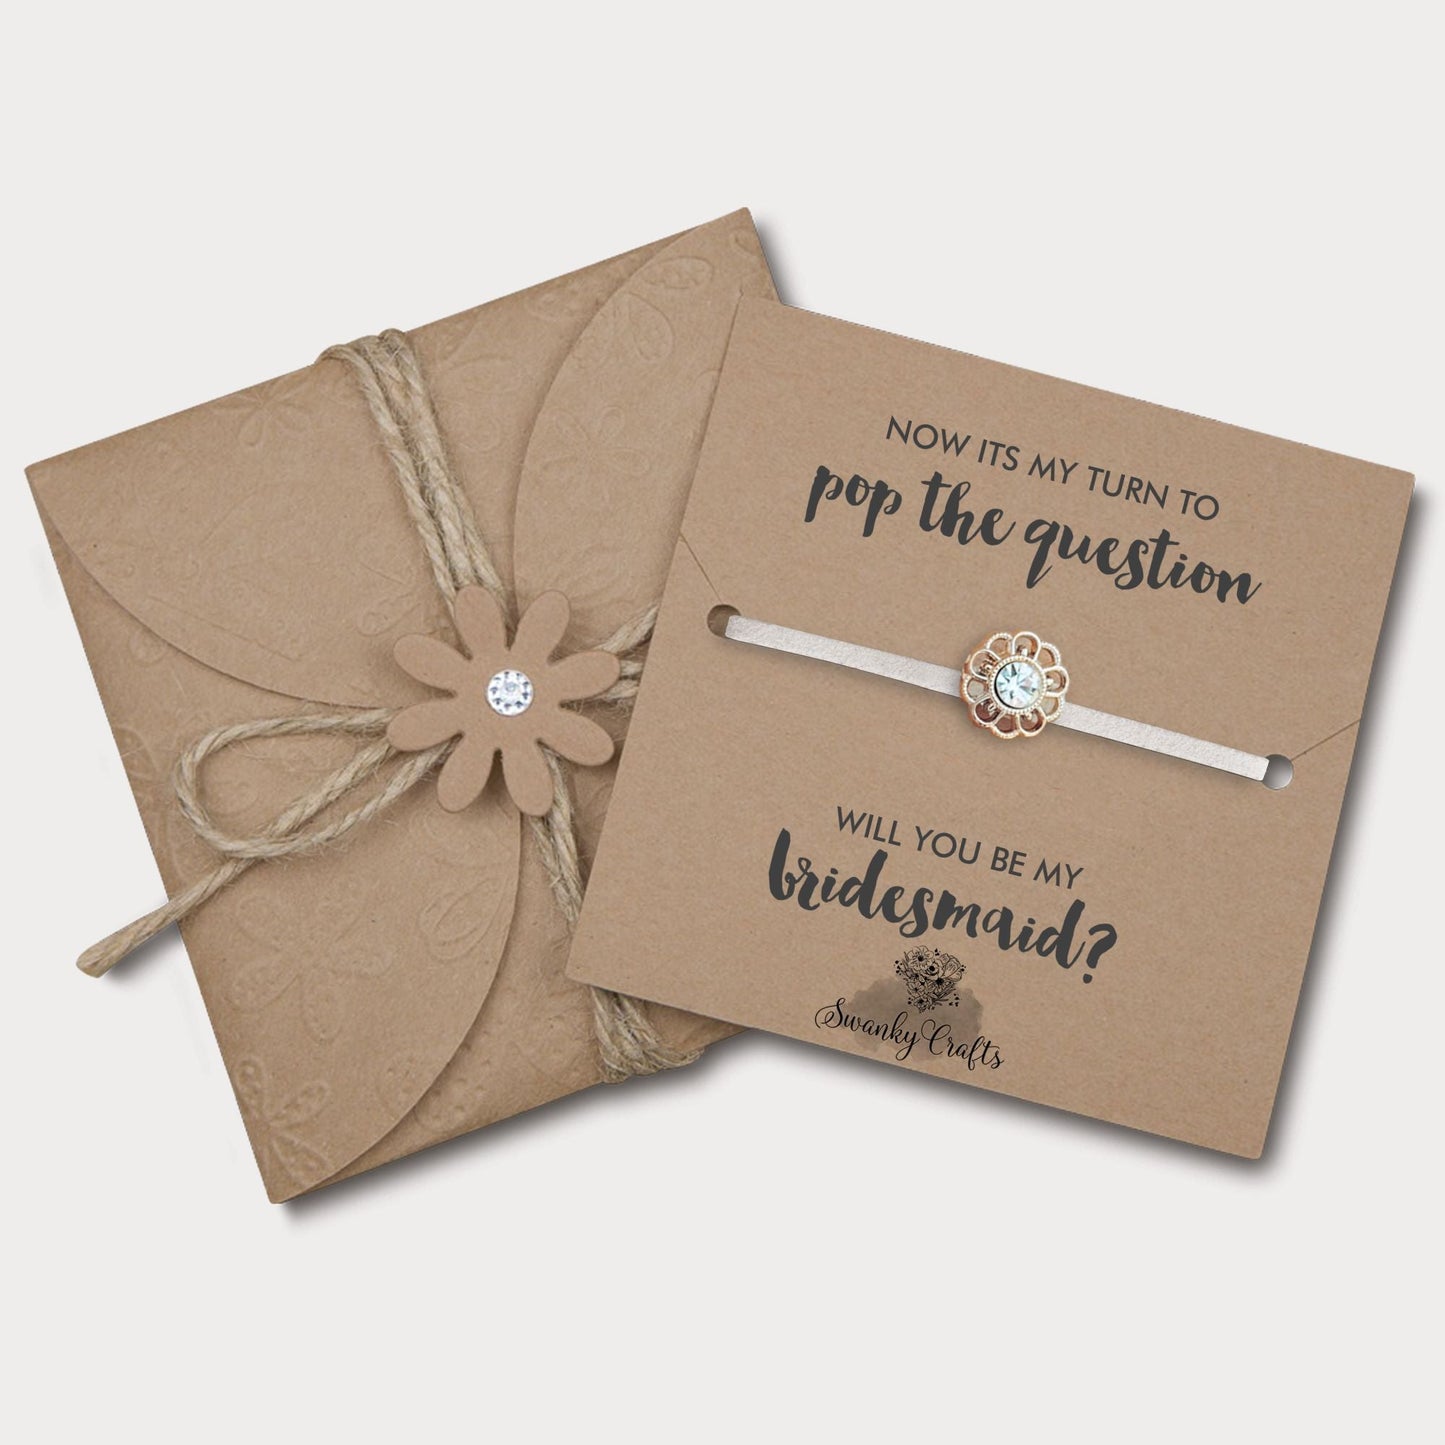 Maid of Honour Proposal Gift with Handmade Bracelet and Gift Wrap